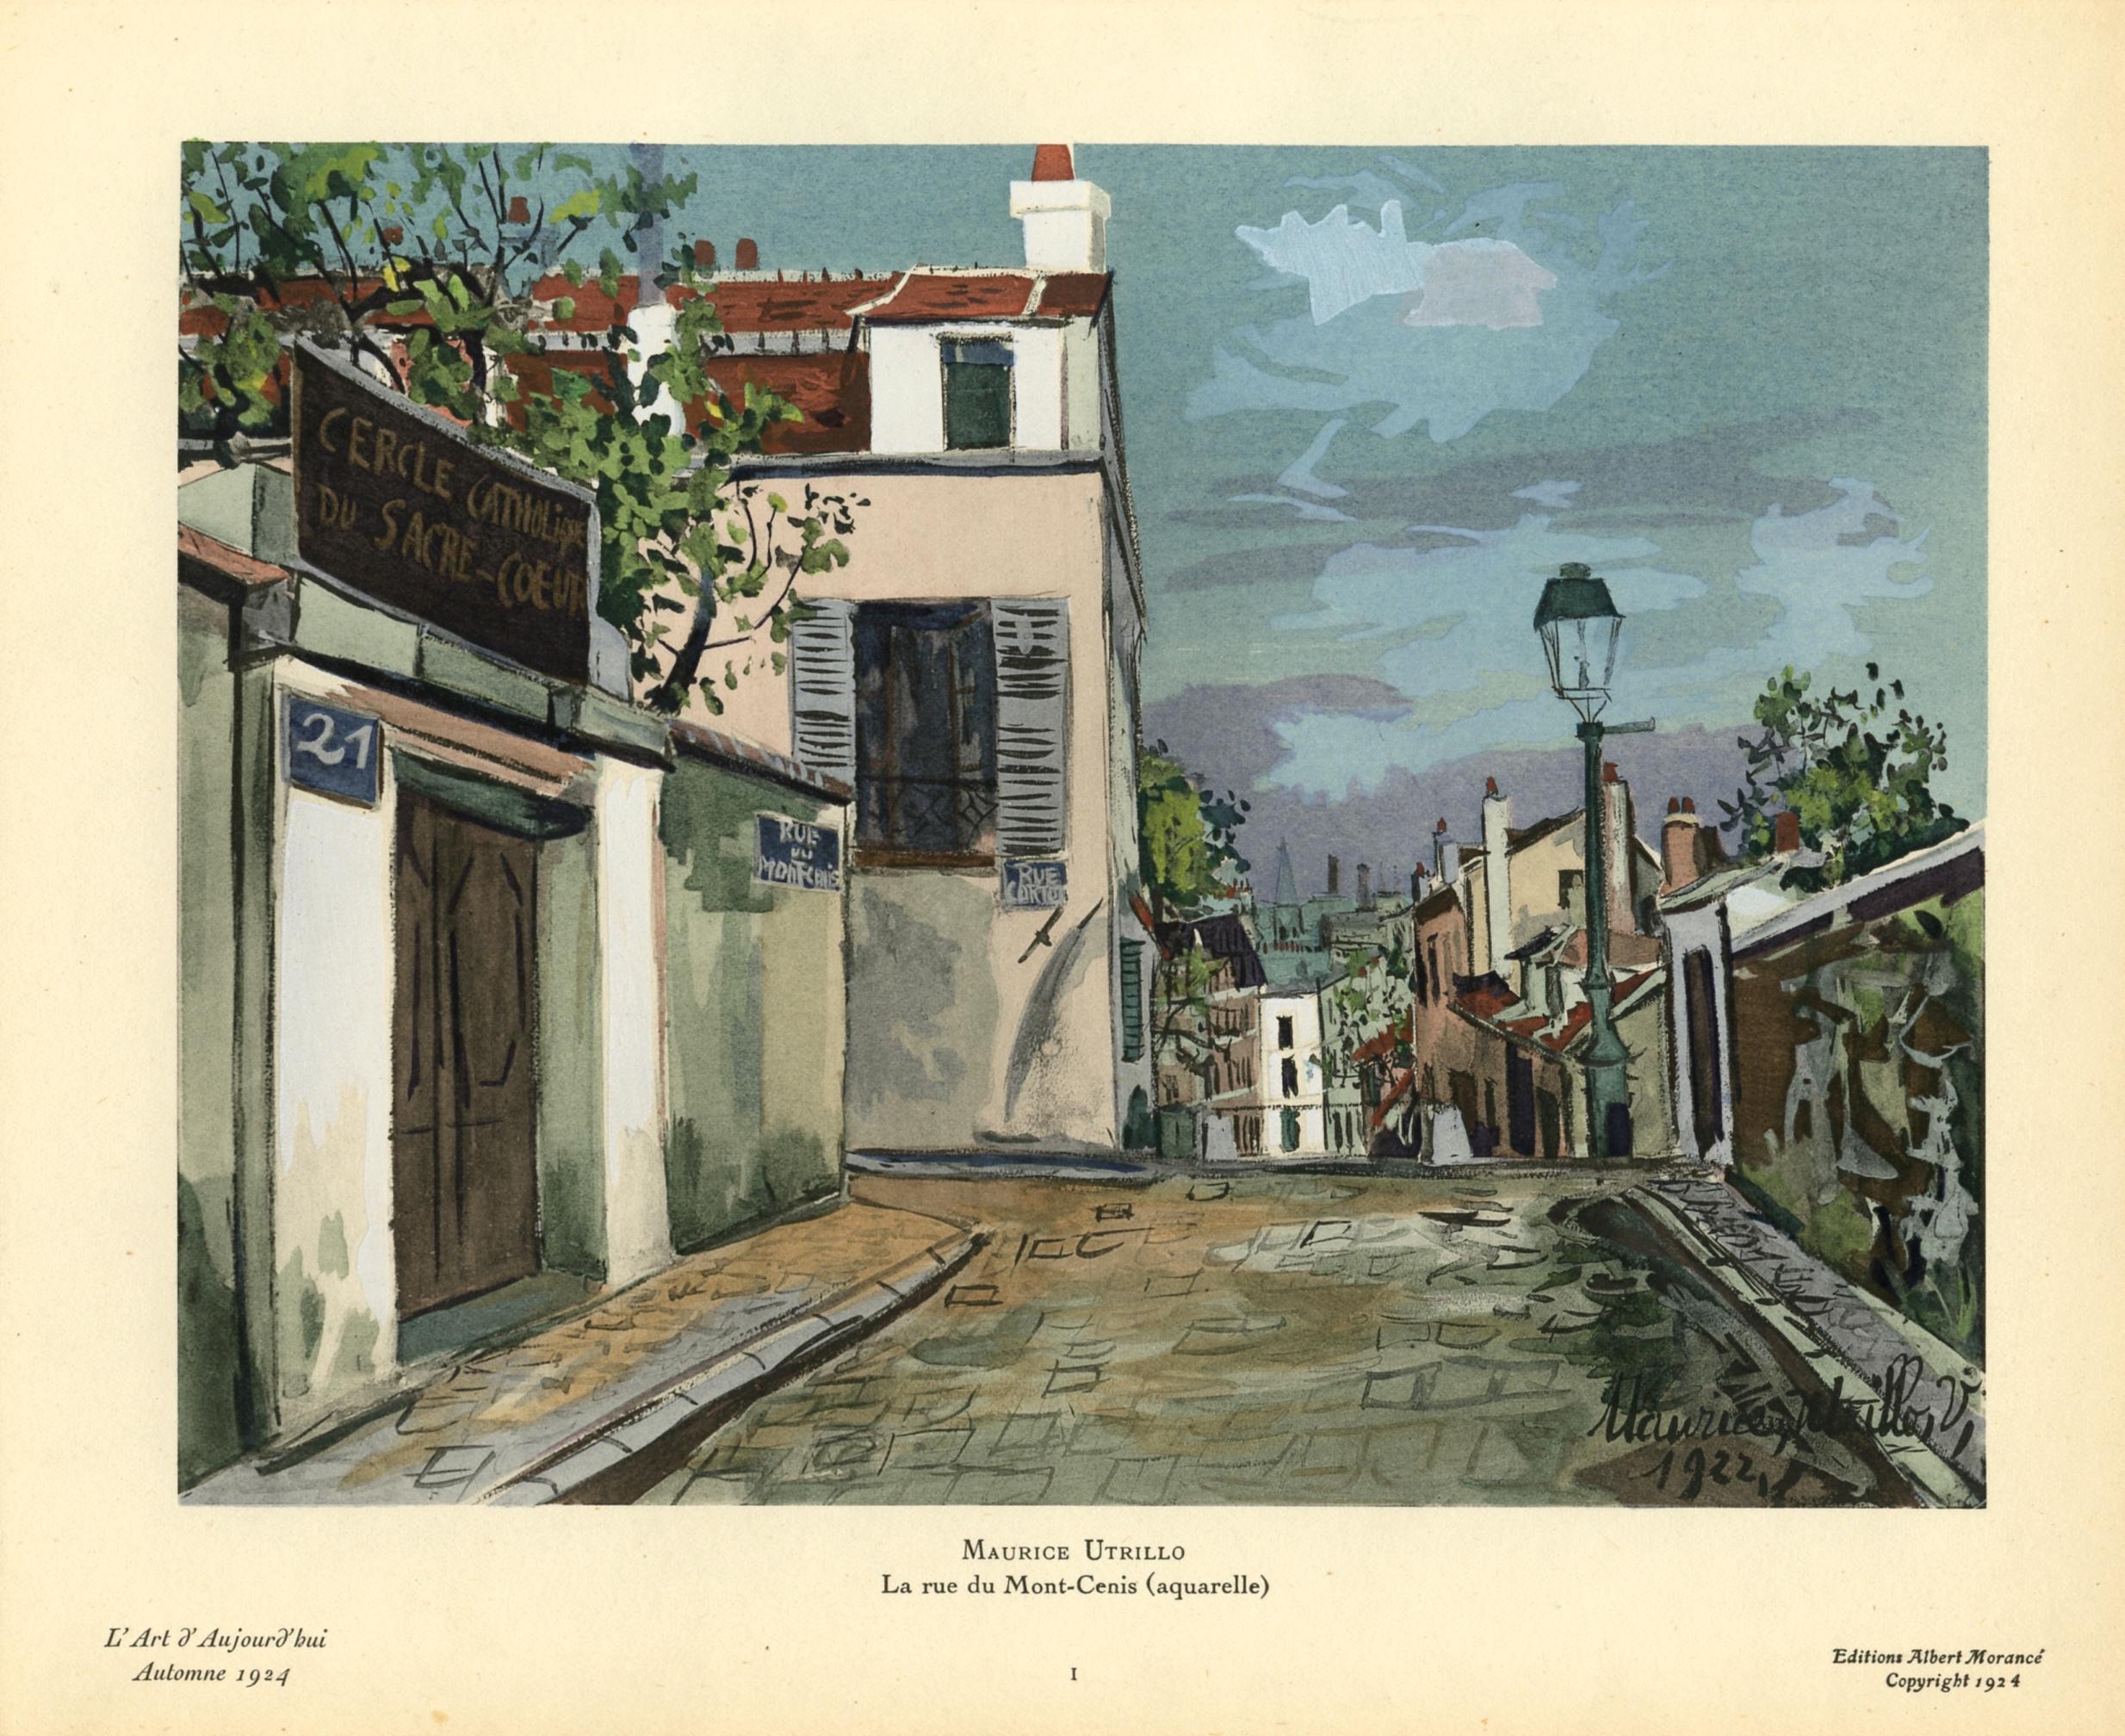 Medium: pochoir (after the watercolor). Published in Paris in 1924 by Albert Morance for 